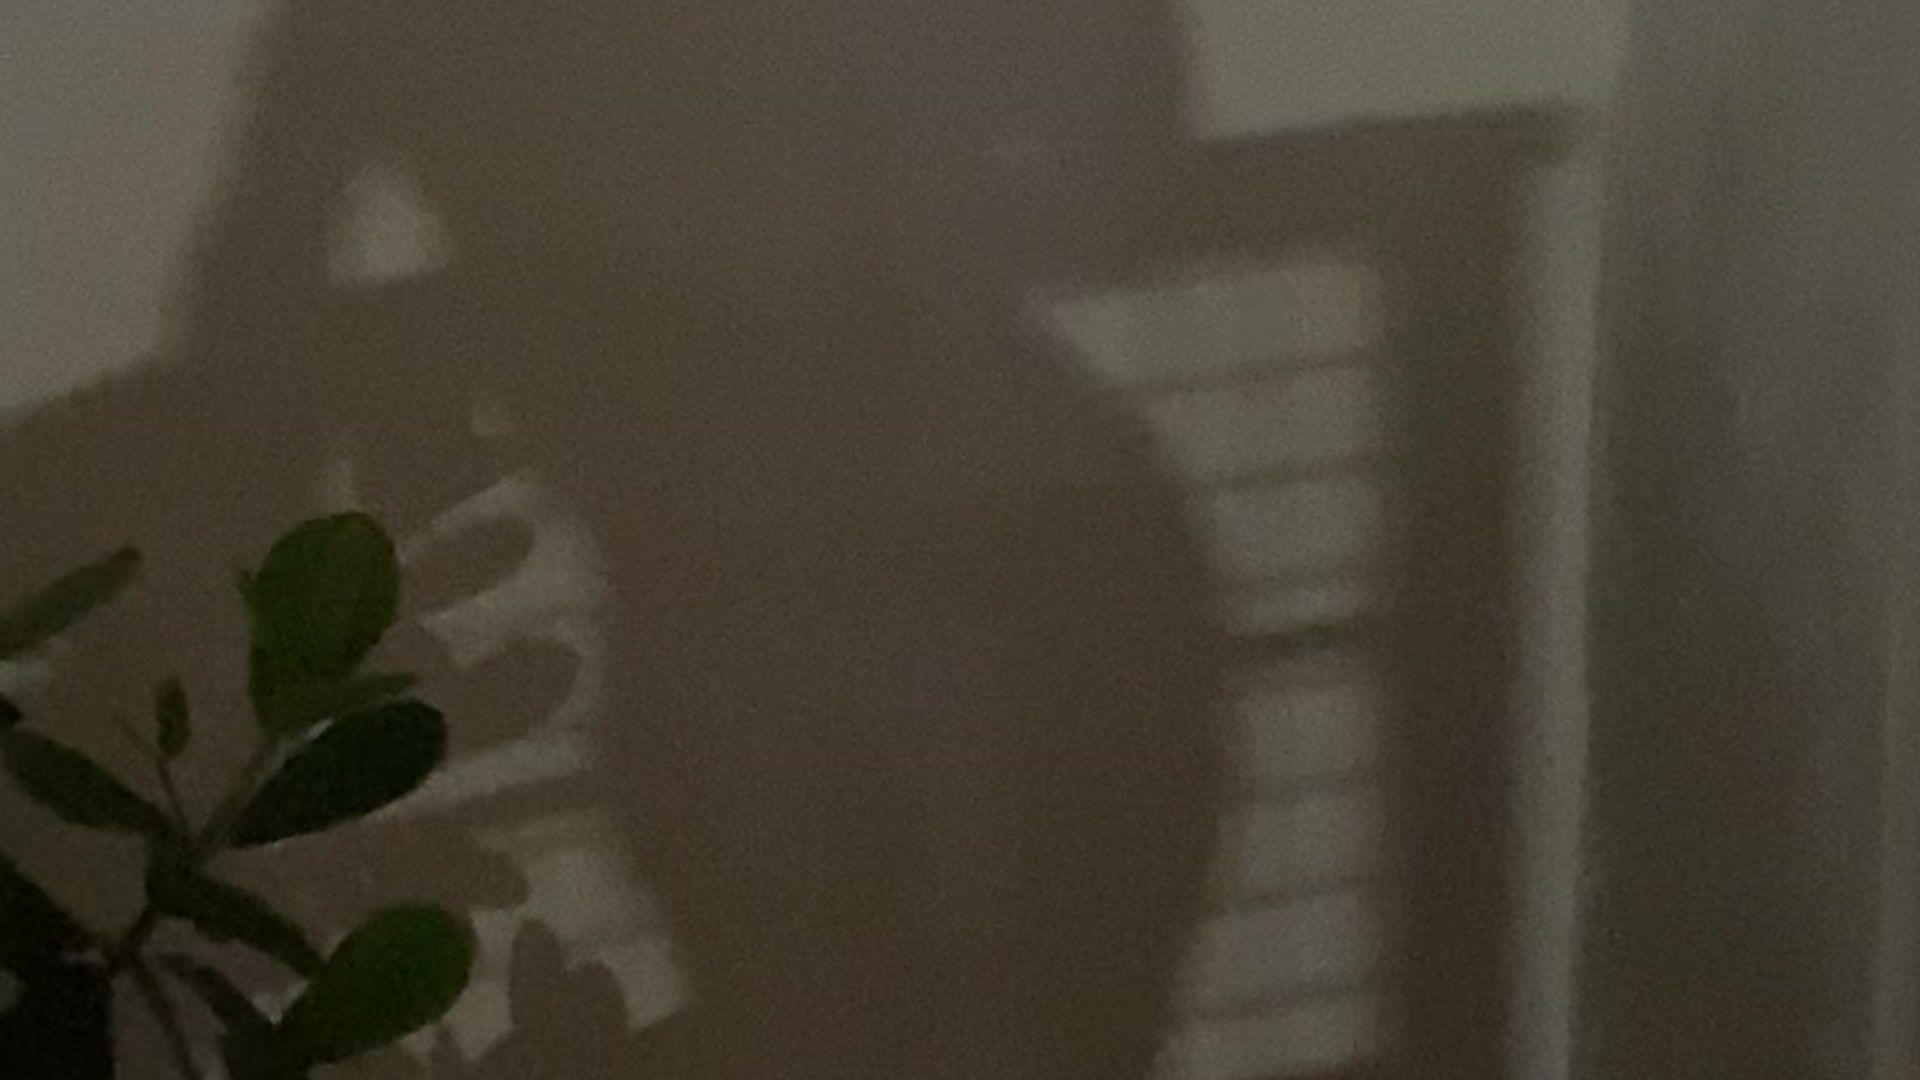 NUDE SHADOW PLAY ON A BALCONY IN MIAMI